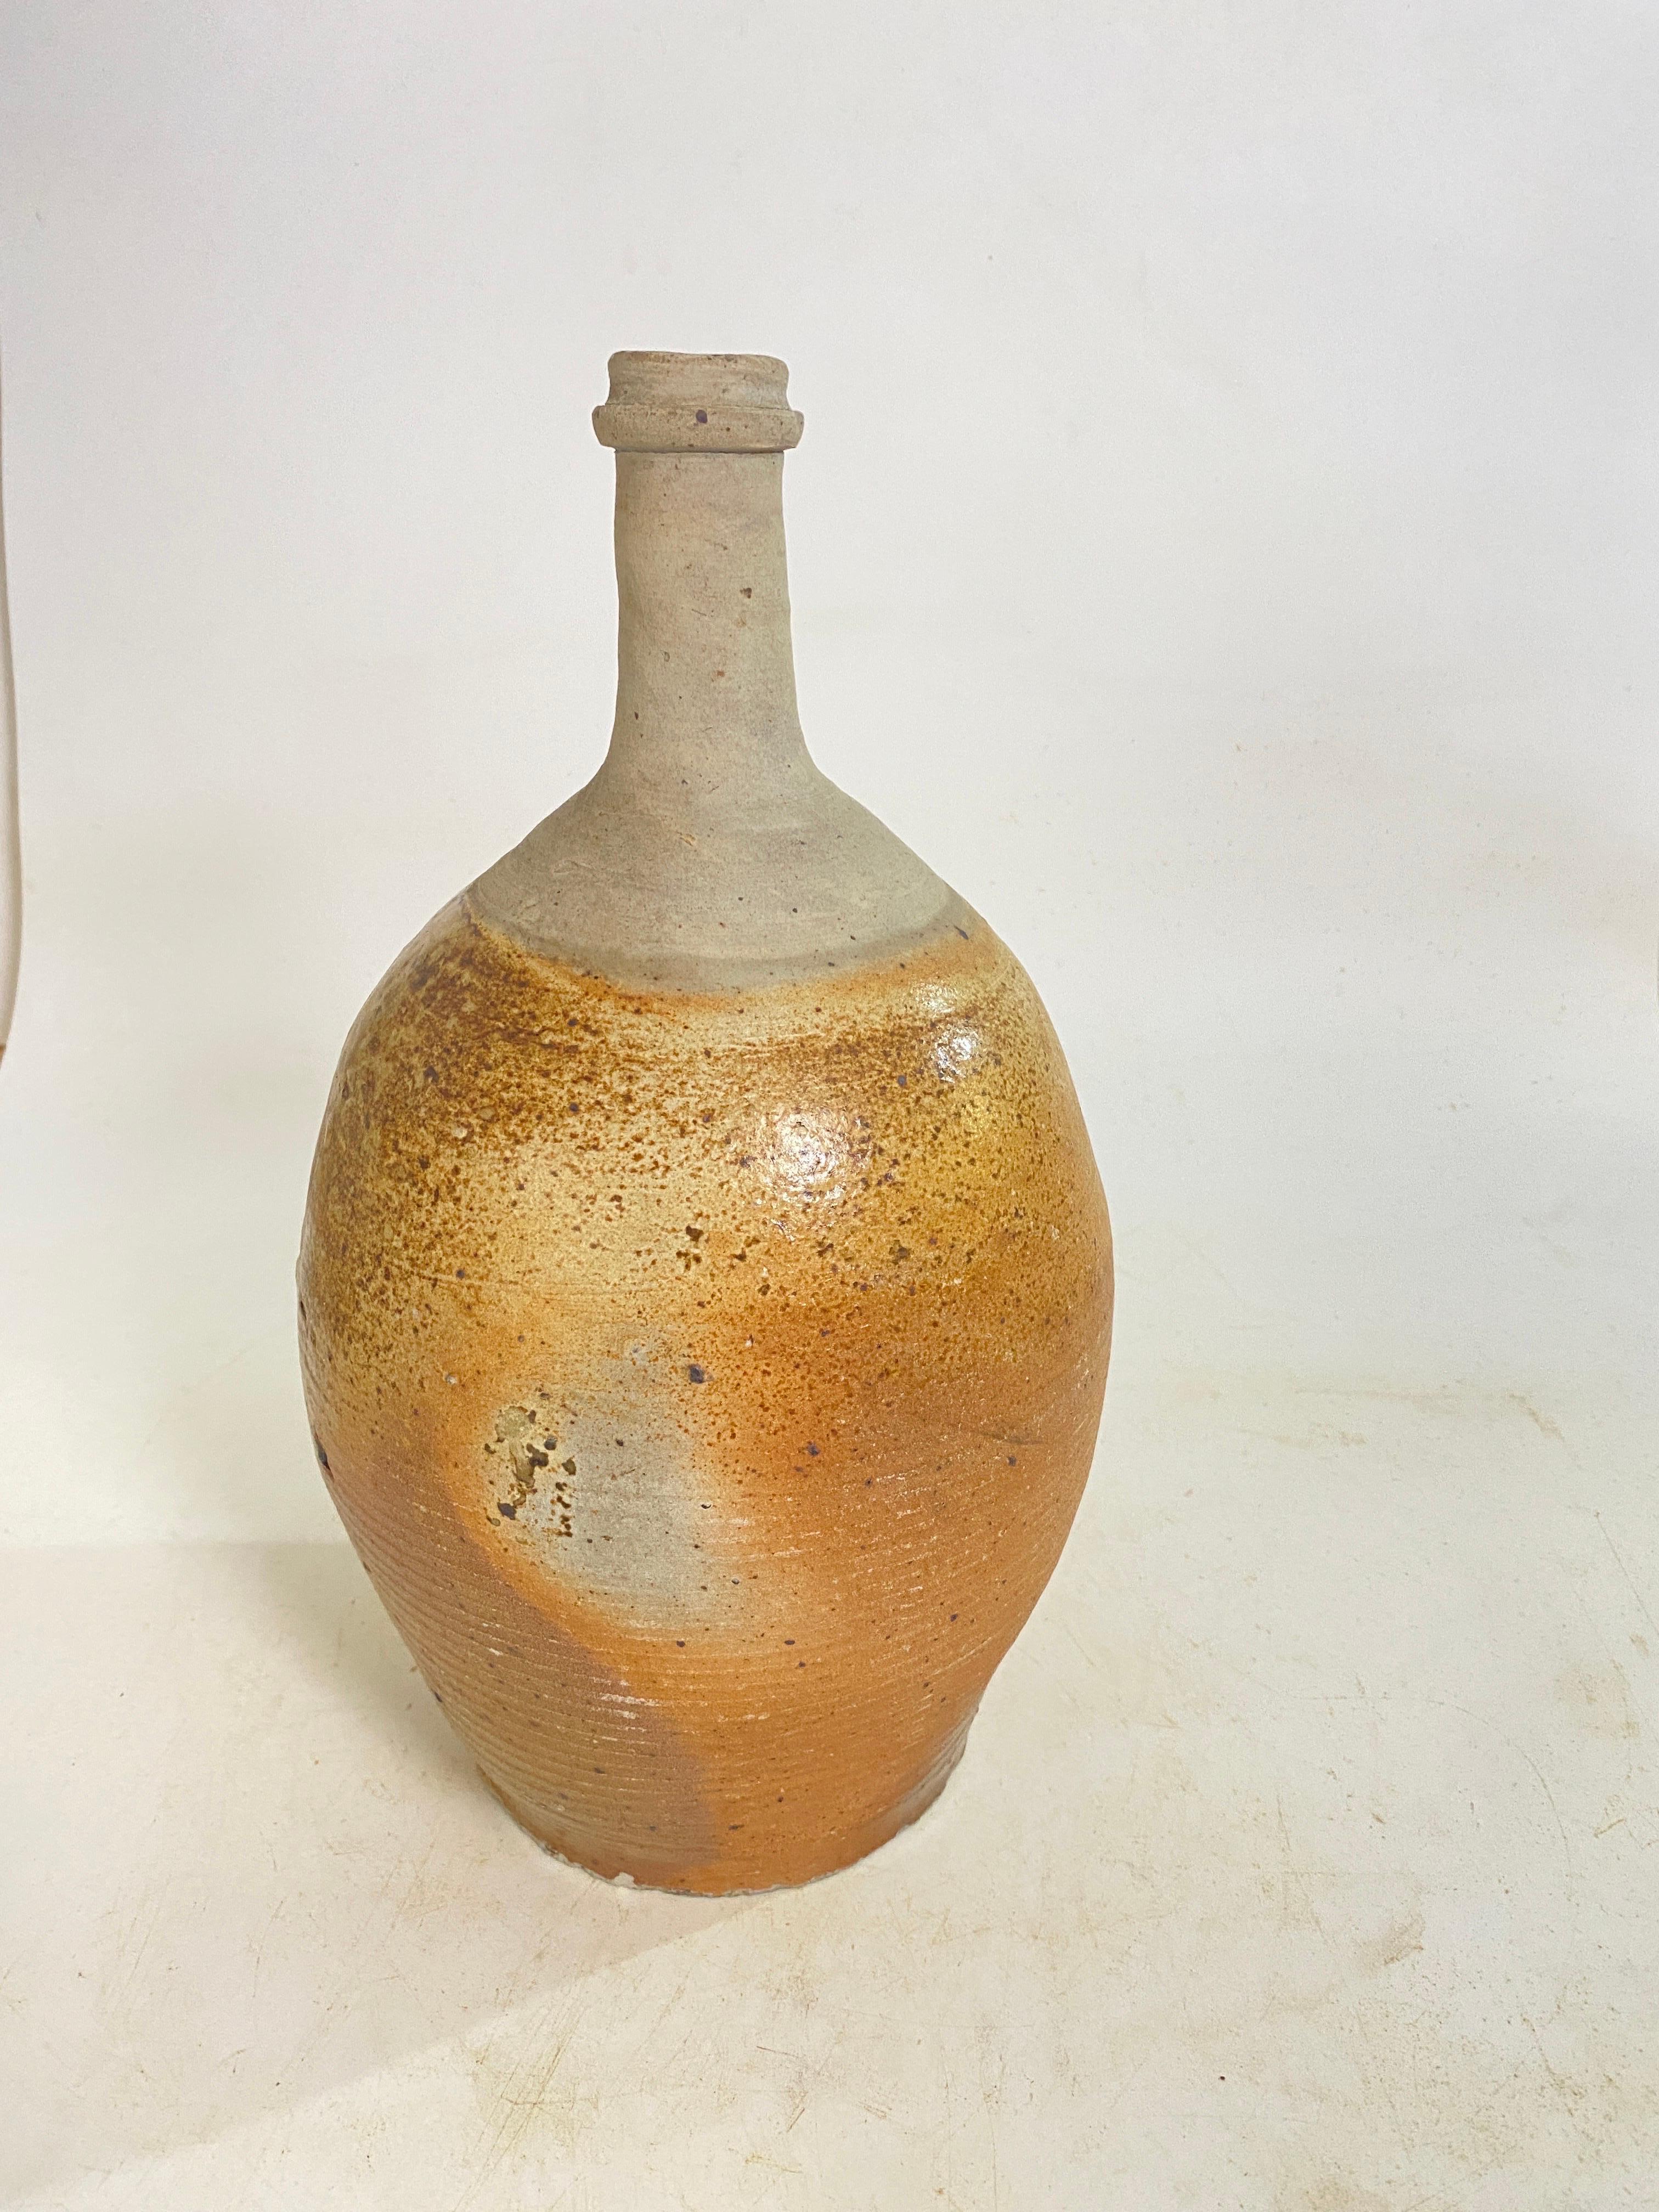 Jug or pitcher in Stoneware, with an exceptional patina. It's color with brown gives very pleasant contrasts. This Pitcher was created in Japan, circa 20th century.